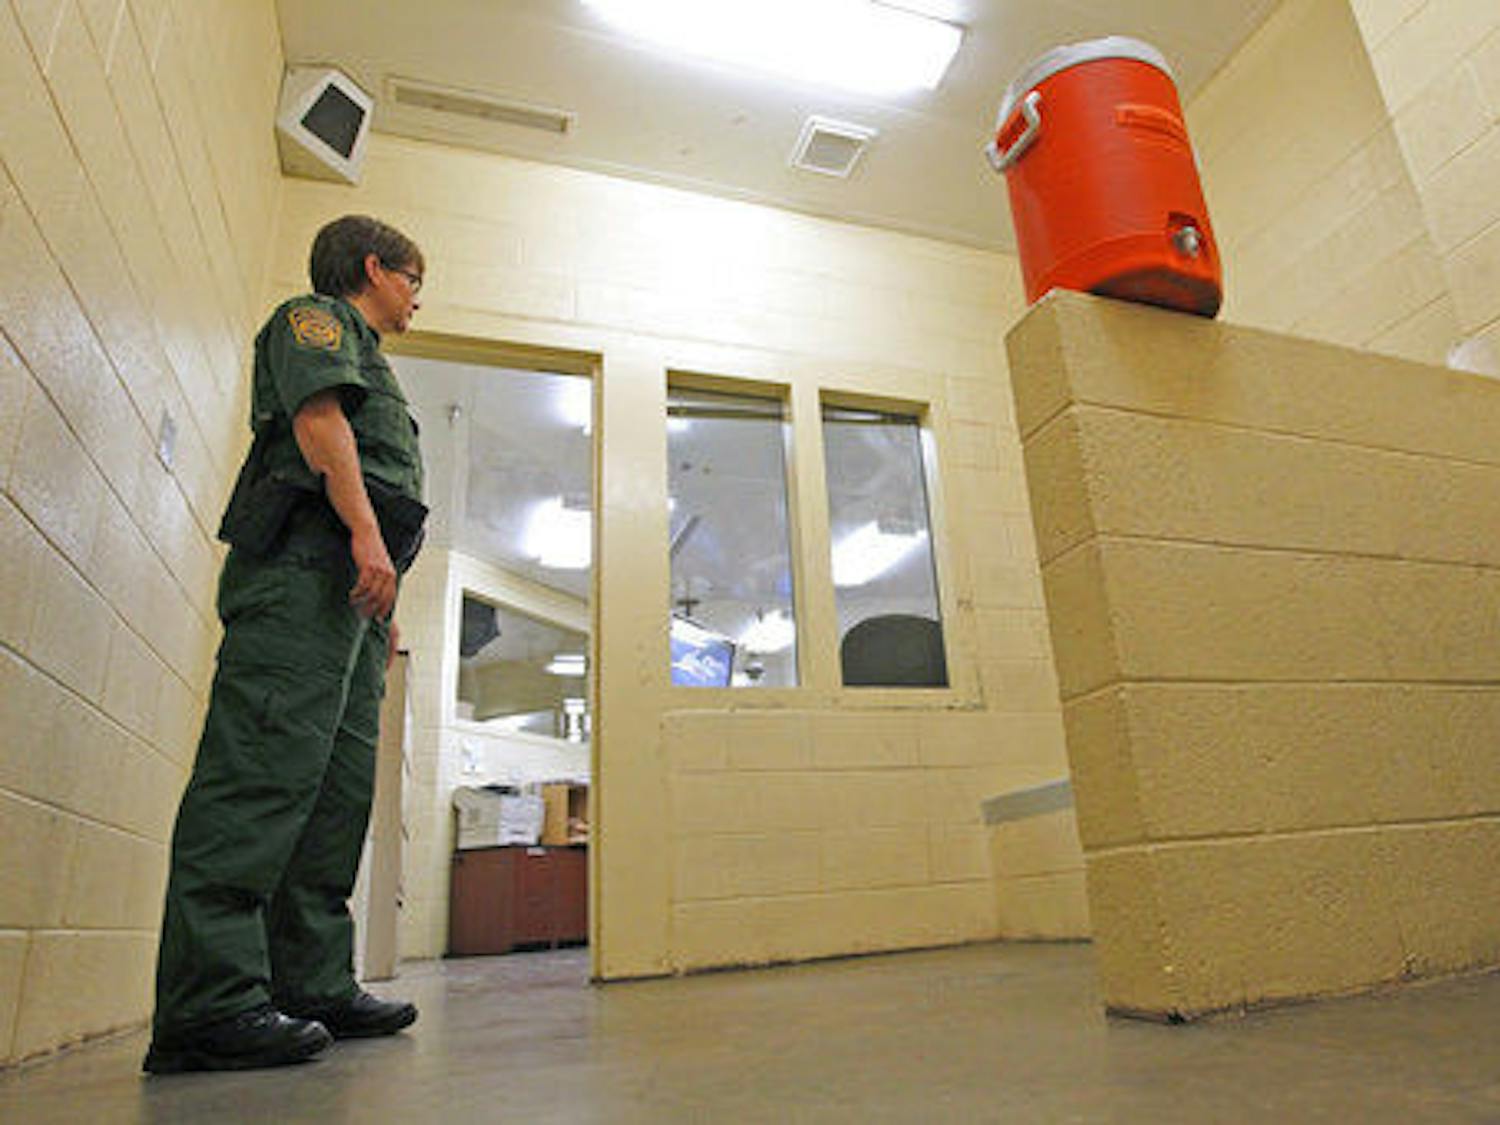 In this Thursday, Aug. 9, 2012, file photo, a Border Patrol agent stands inside one of the holding areas at the Tucson Sector of the U.S. Customs and Border Protection headquarters in Tucson, Arizona.